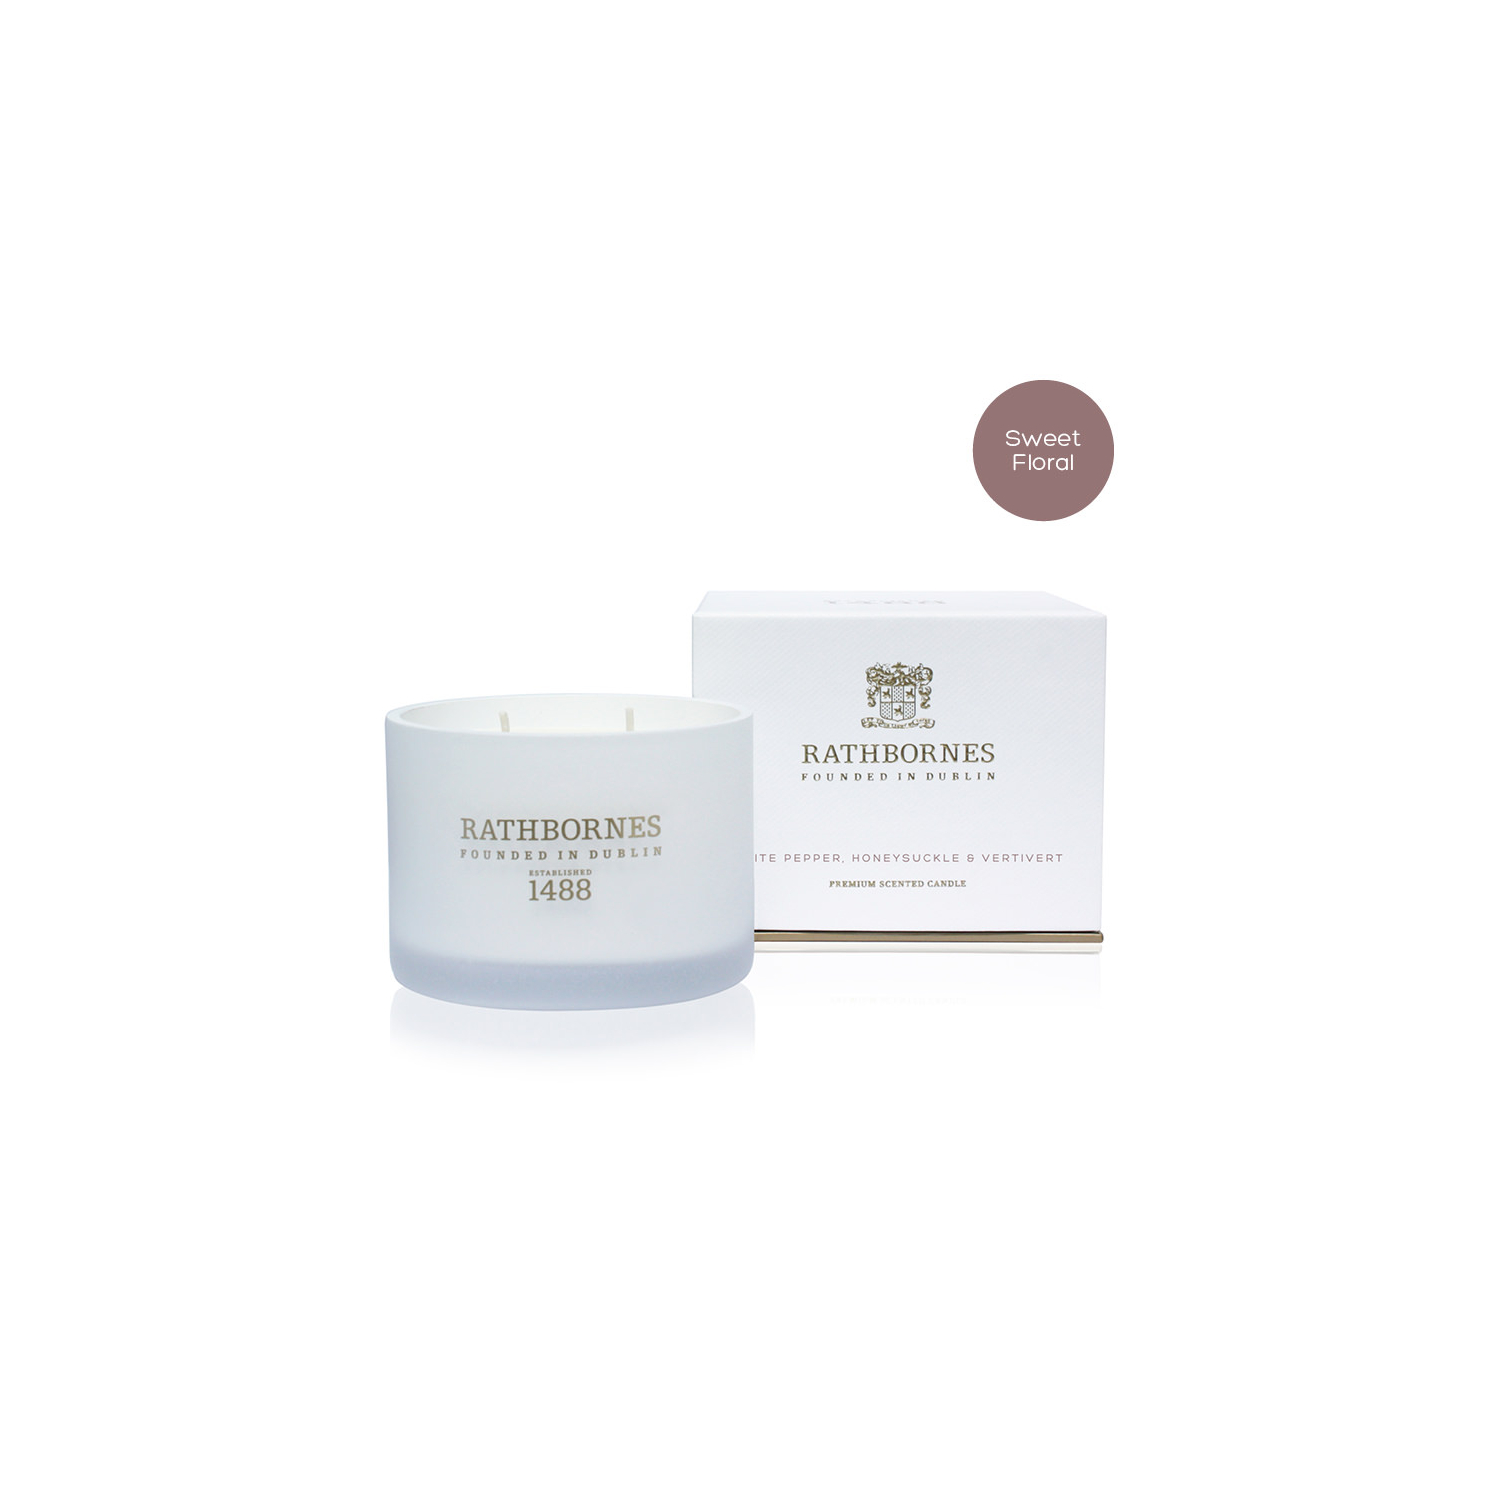 White Pepper, Honeysuckle and Vertivert Classic Candle